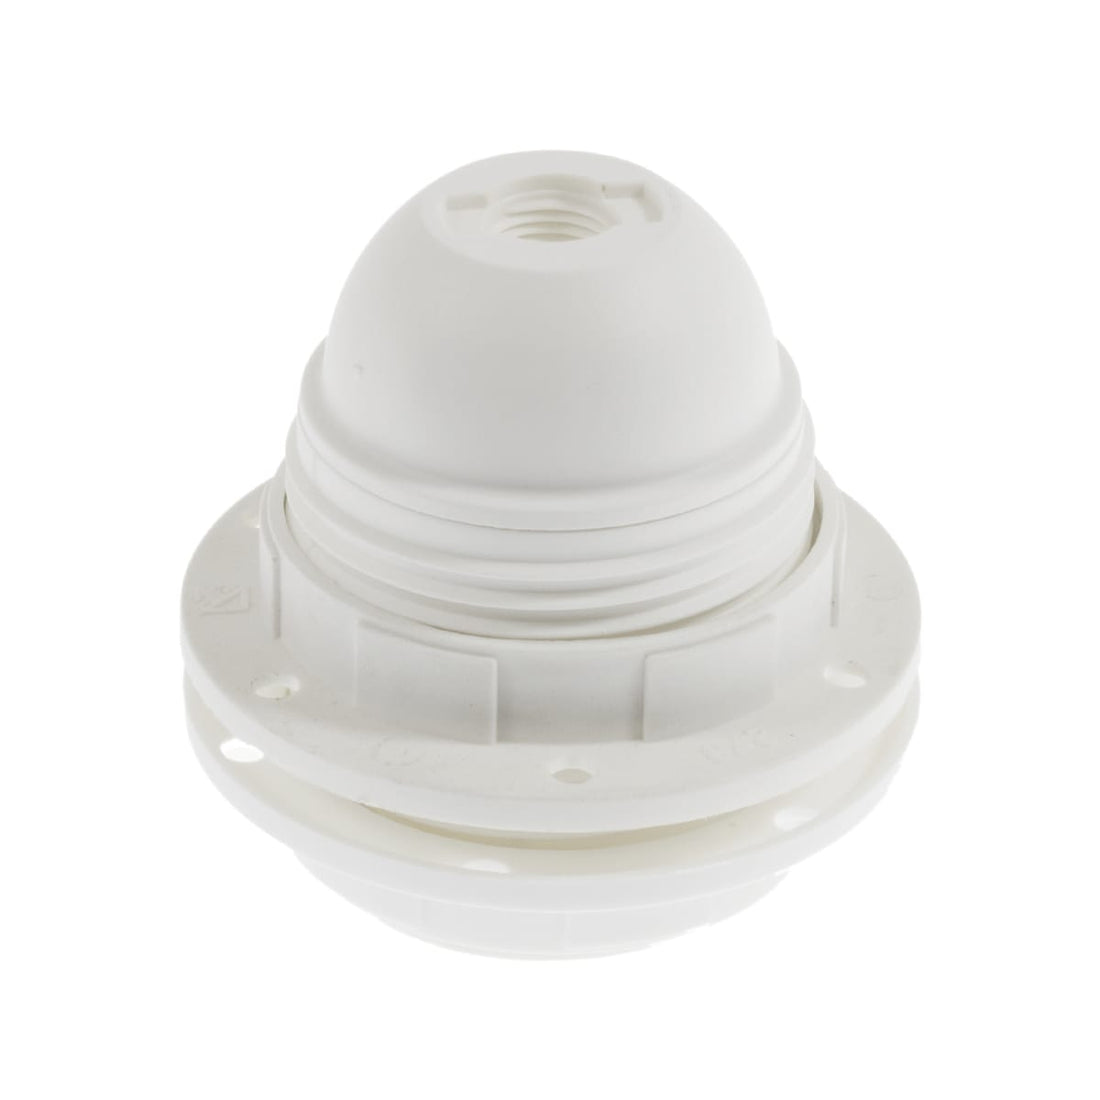 E27 LAMP HOLDER WITH RING NUT WHITE